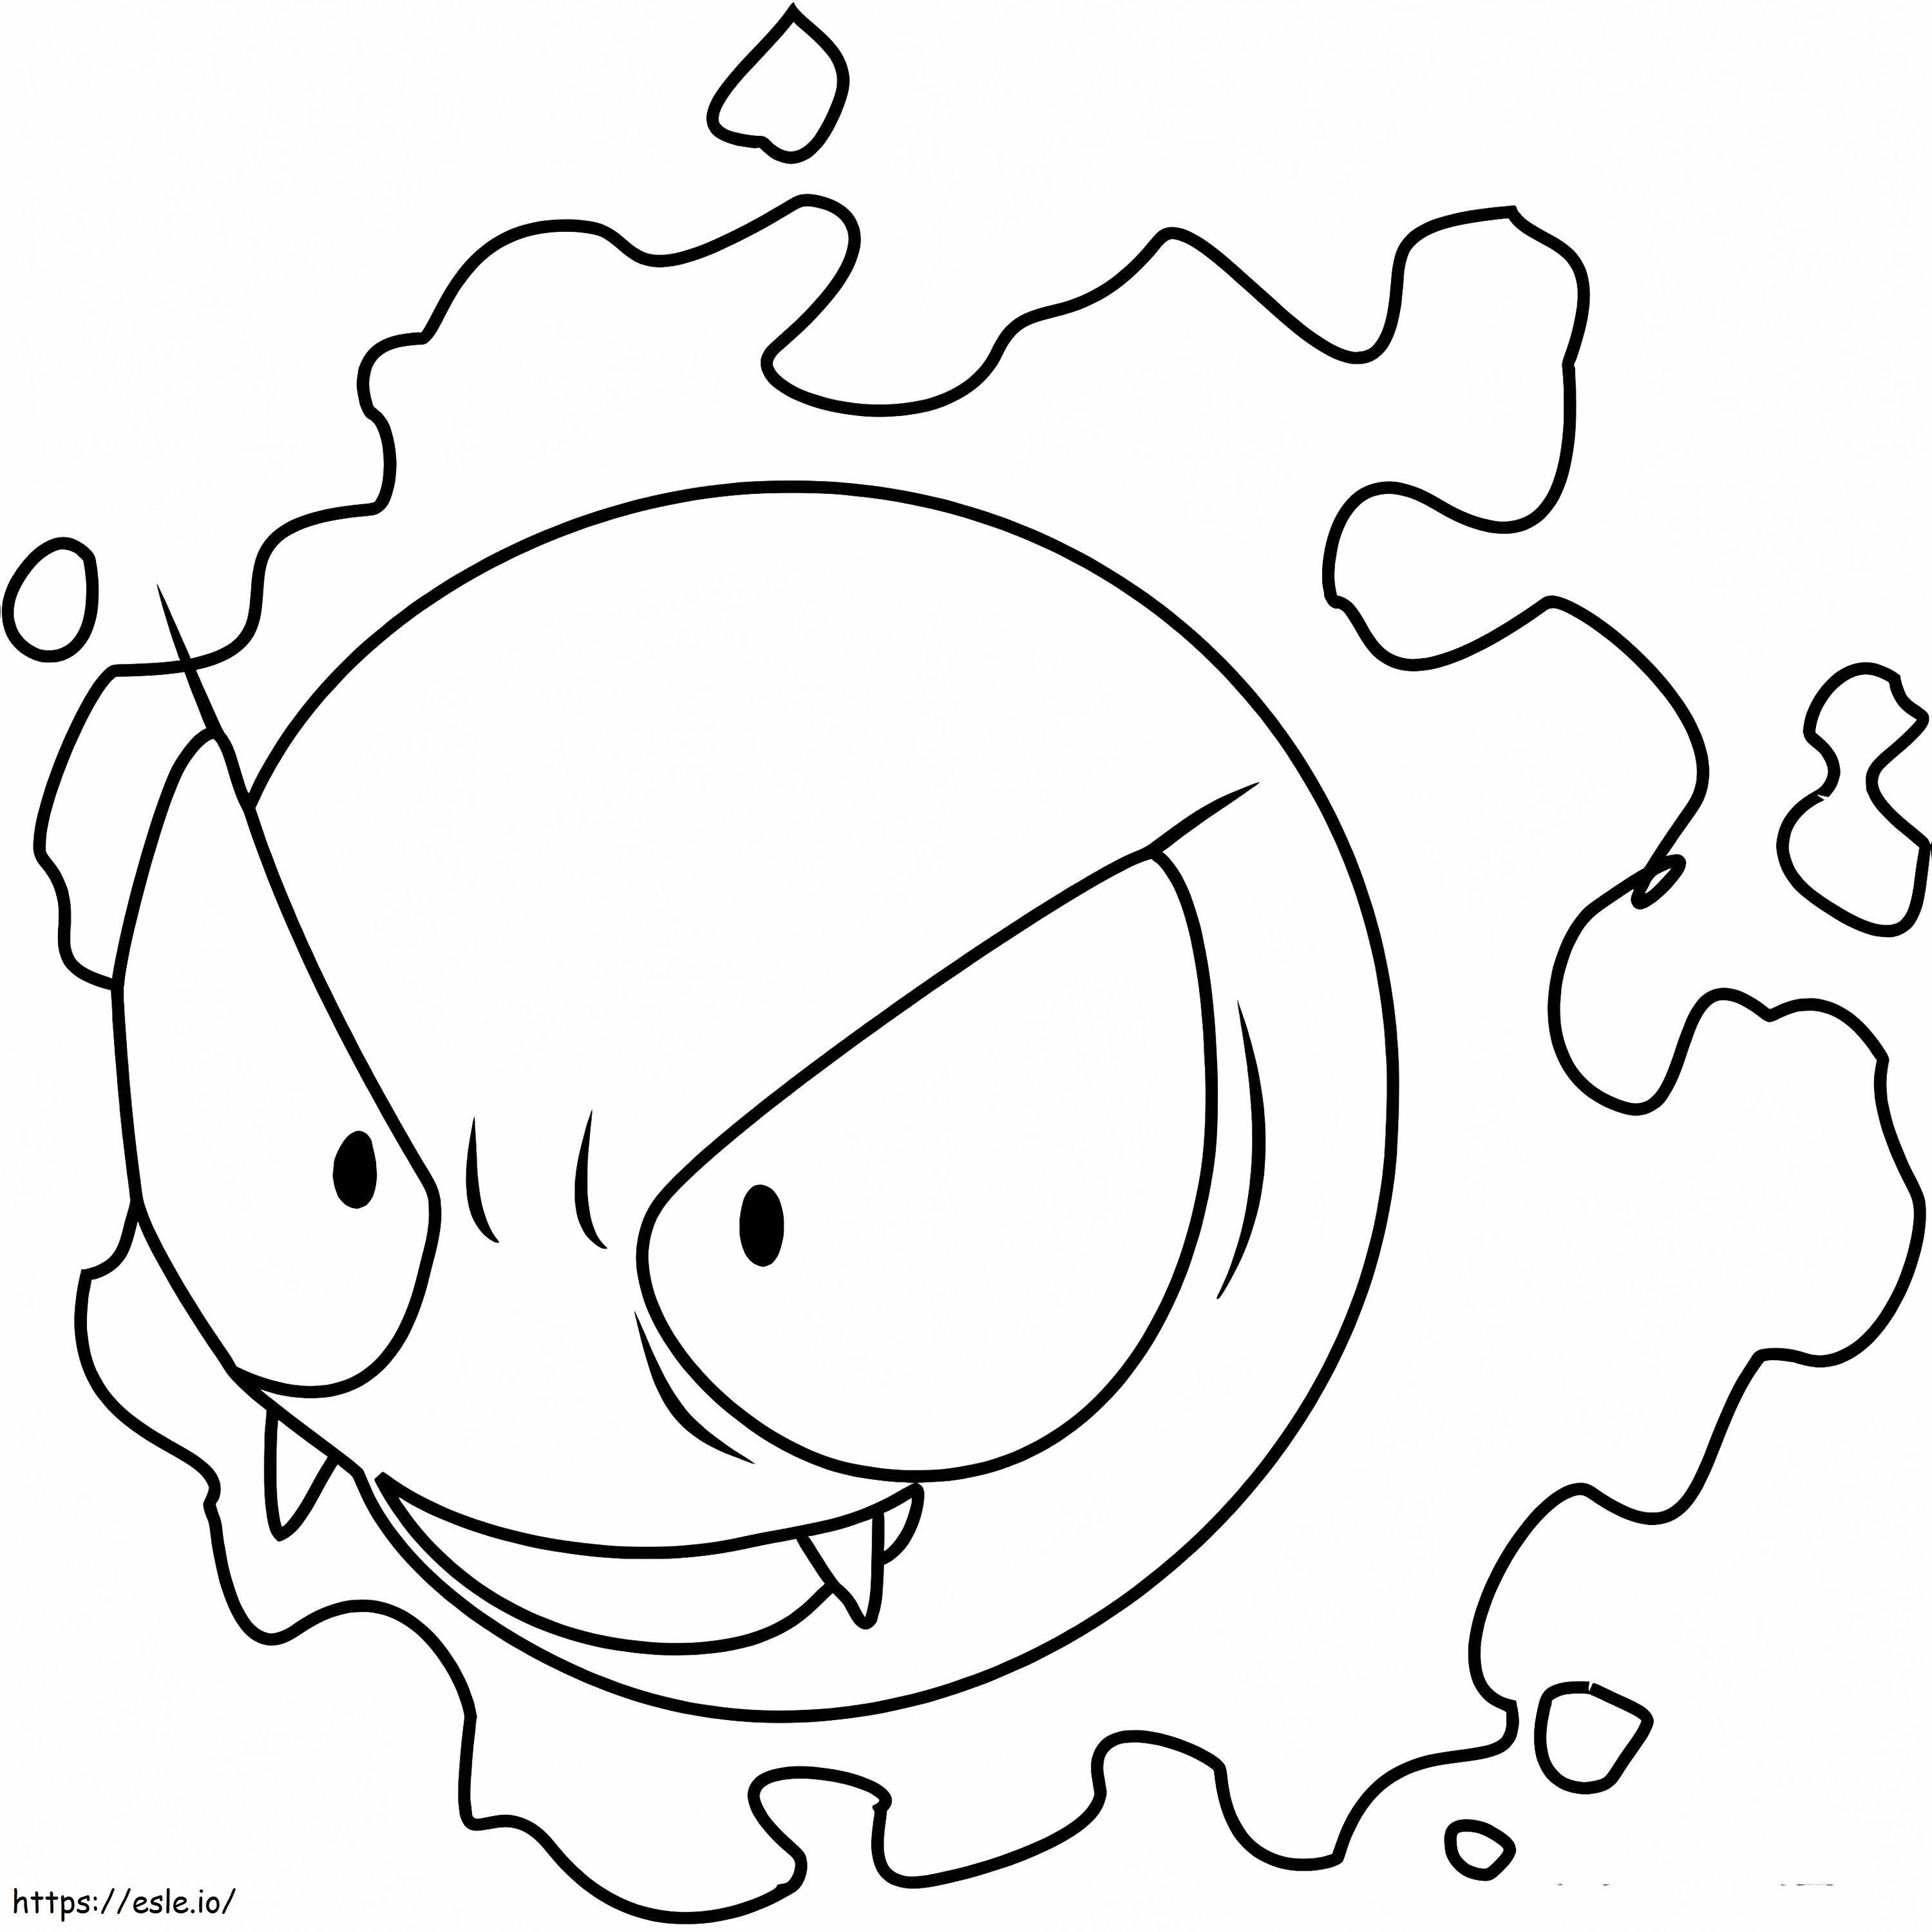 Gastly A Pokemon coloring page